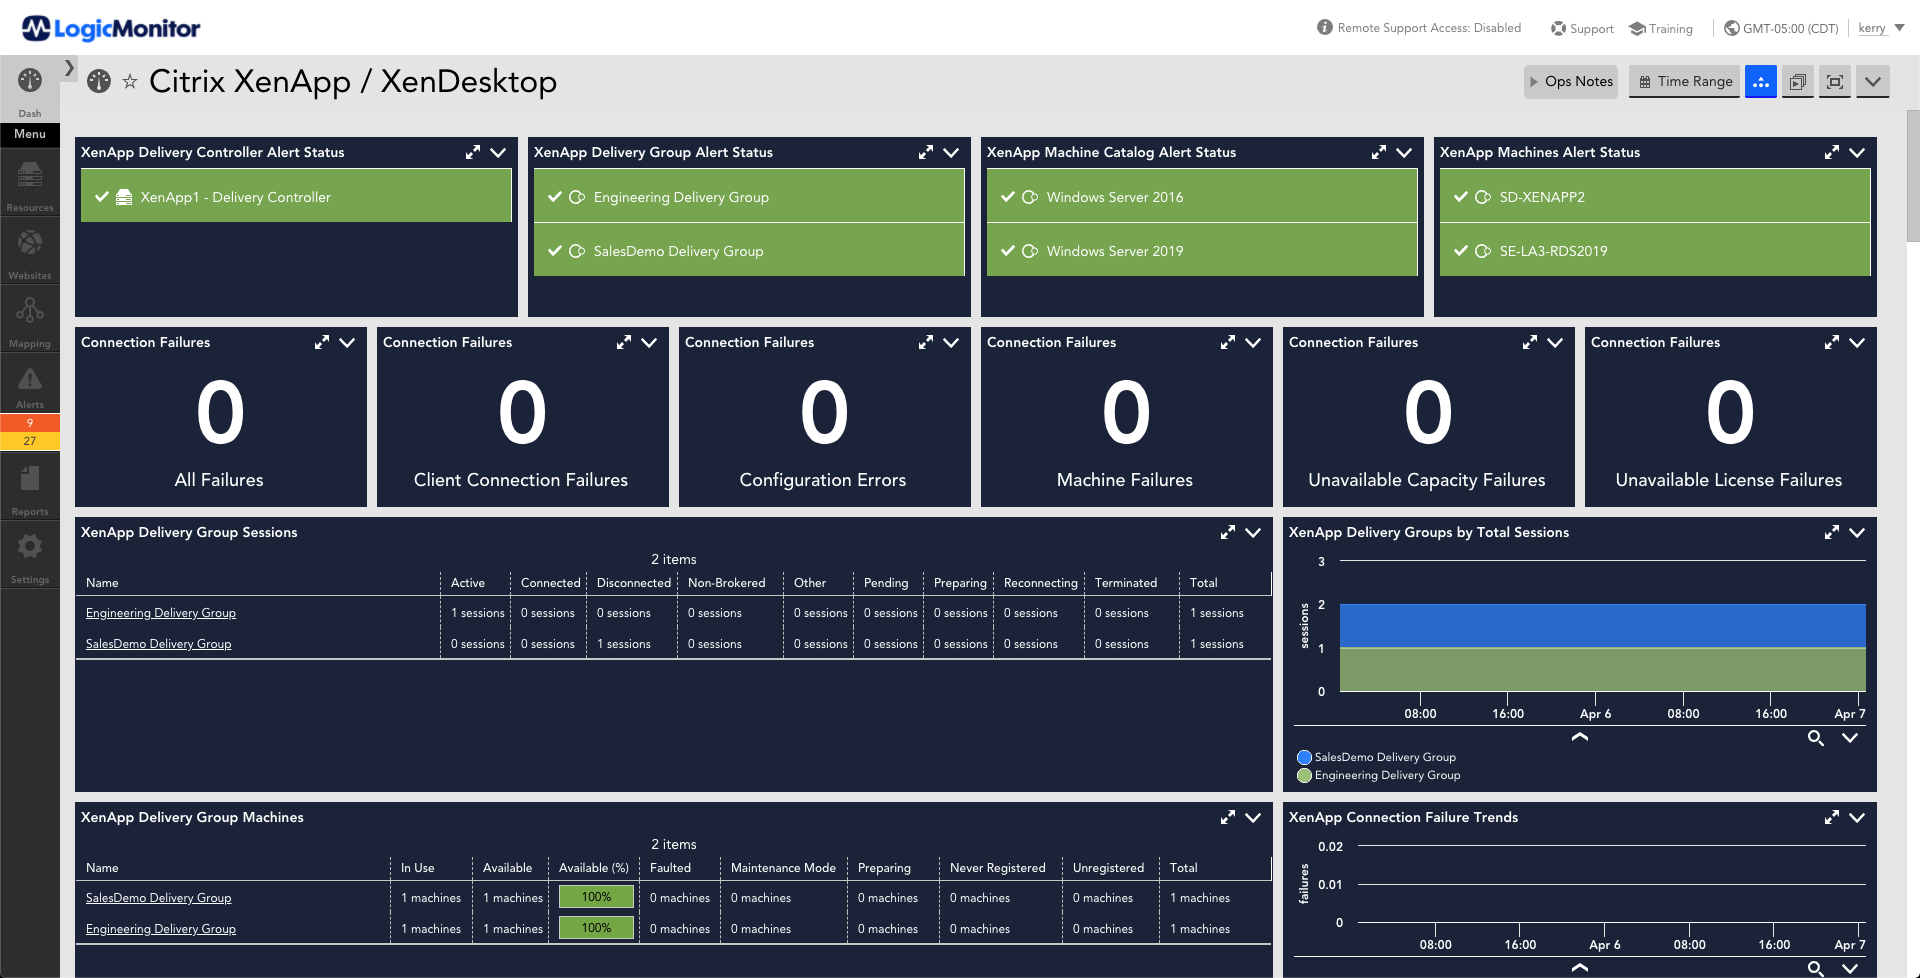 http://This%20dashboard%20provides%20status%20of%20Citrix%20XenApp%20/%20Xendesk%20applications.%20The%20metrics%20displayed%20are%20alert%20status,%20connection%20failure,%20delivery%20group%20sessions,%20delivery%20group%20sessions%20over%20time,%20delivery%20group%20machines,%20connection%20failure%20over%20time.